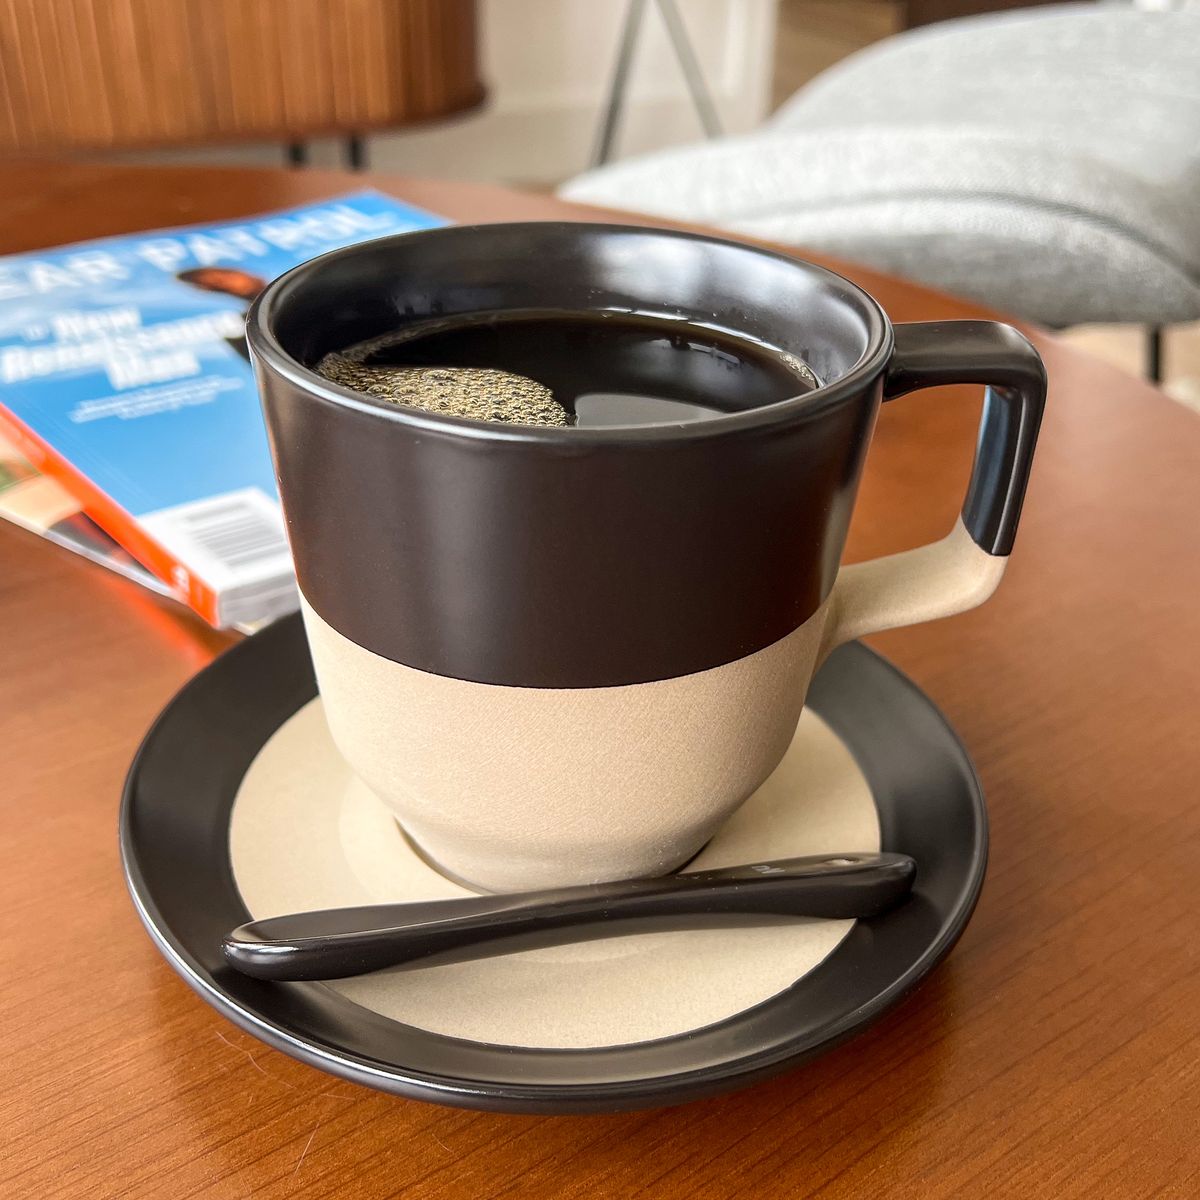 https://hips.hearstapps.com/hmg-prod.s3.amazonaws.com/images/notneutral-pico-coffee-mug-review-lead-641df1302839f.jpg?crop=0.6666666666666666xw:1xh;center,top&resize=1200:*